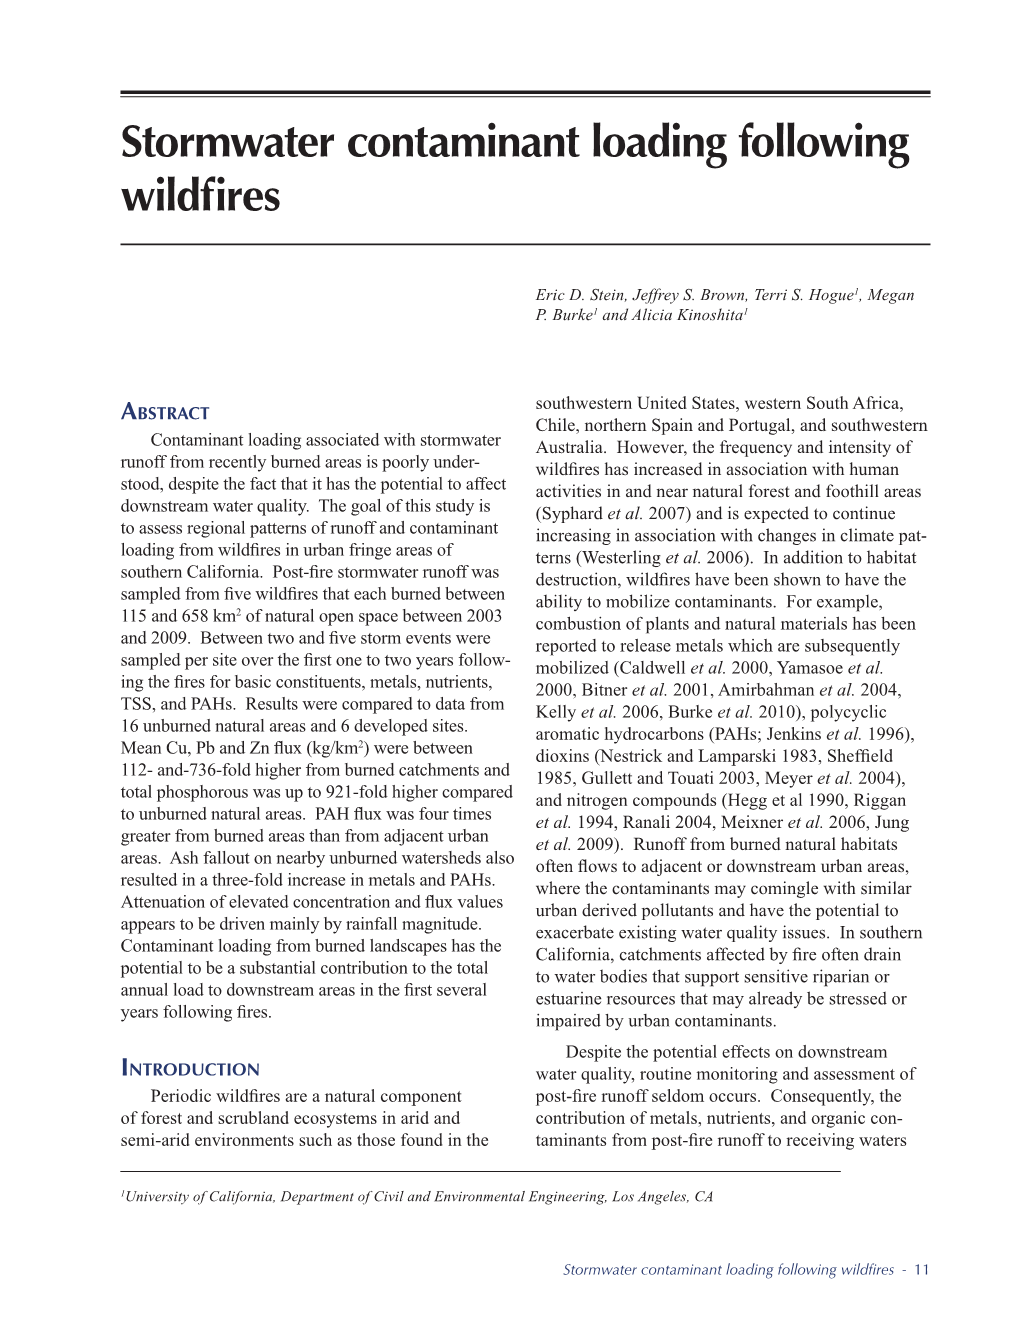 Stormwater Contaminant Loading Following Wildfires